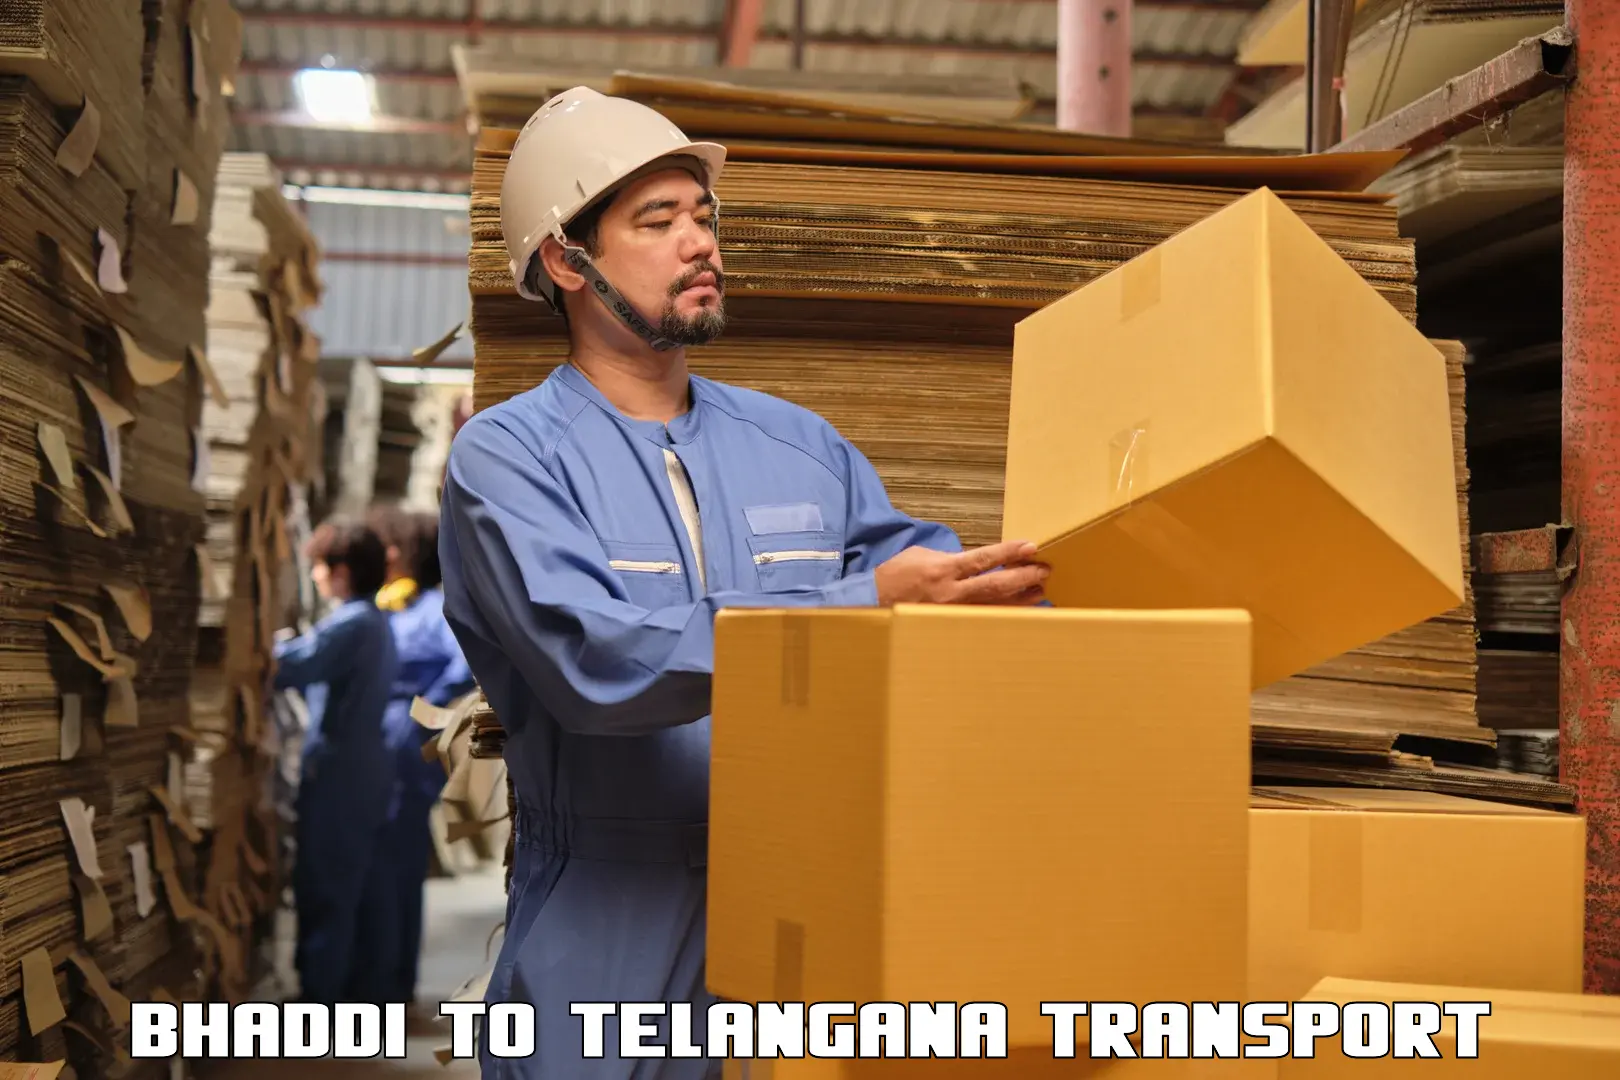 Shipping services Bhaddi to Hyderabad